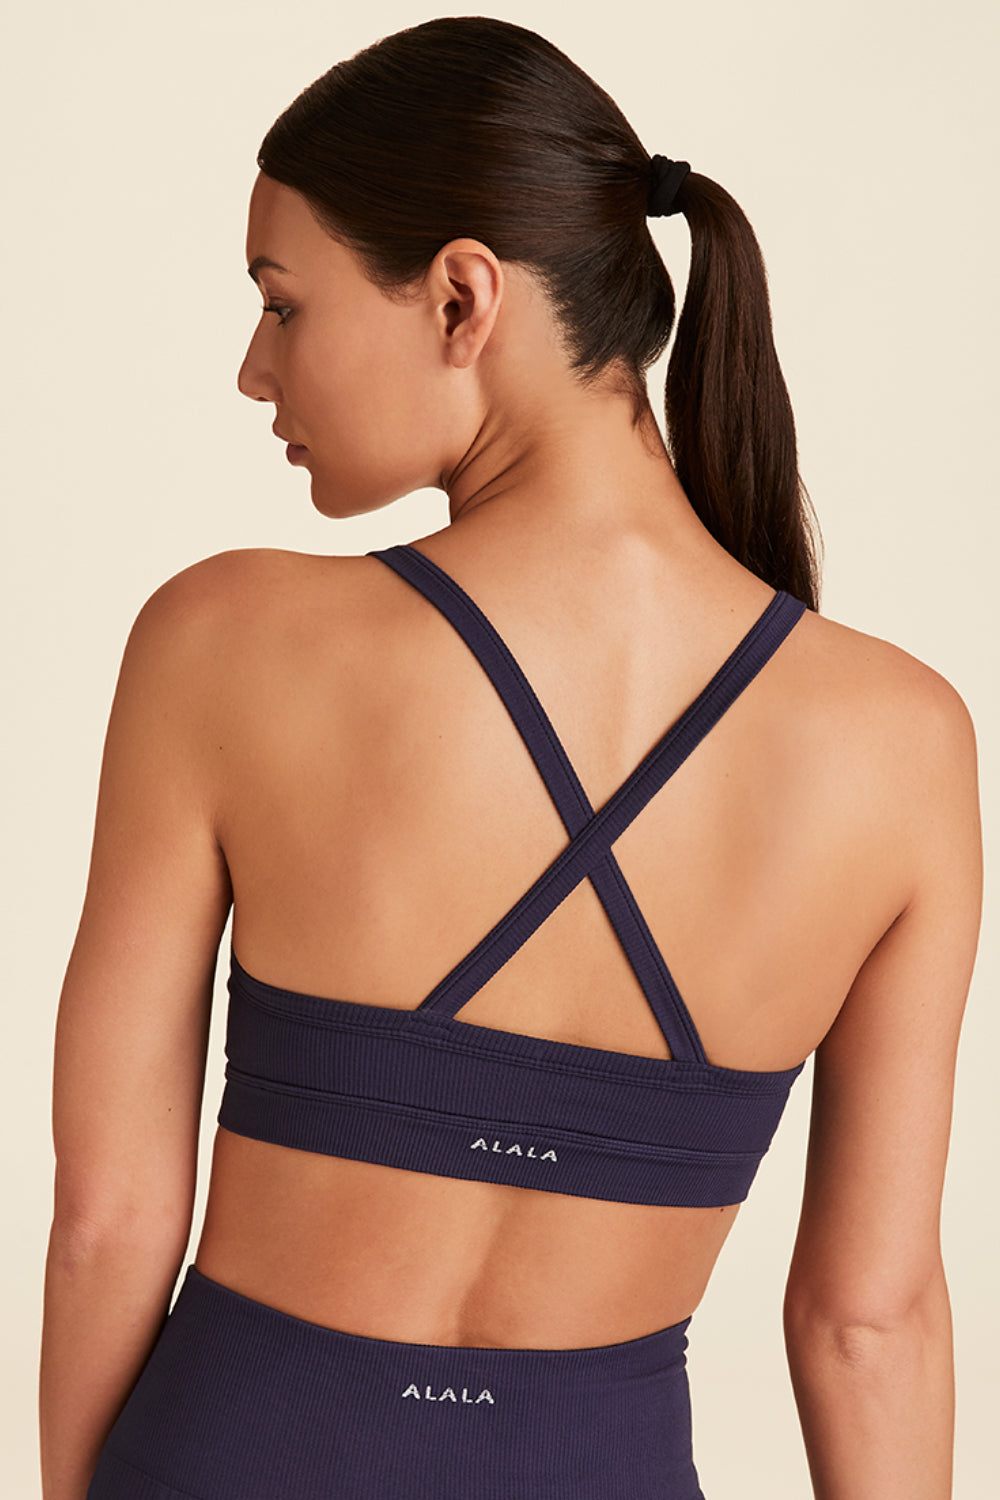 A Bra To Support Those Taking The Next Step In Their (Recovery) Journey -  VITA Daily